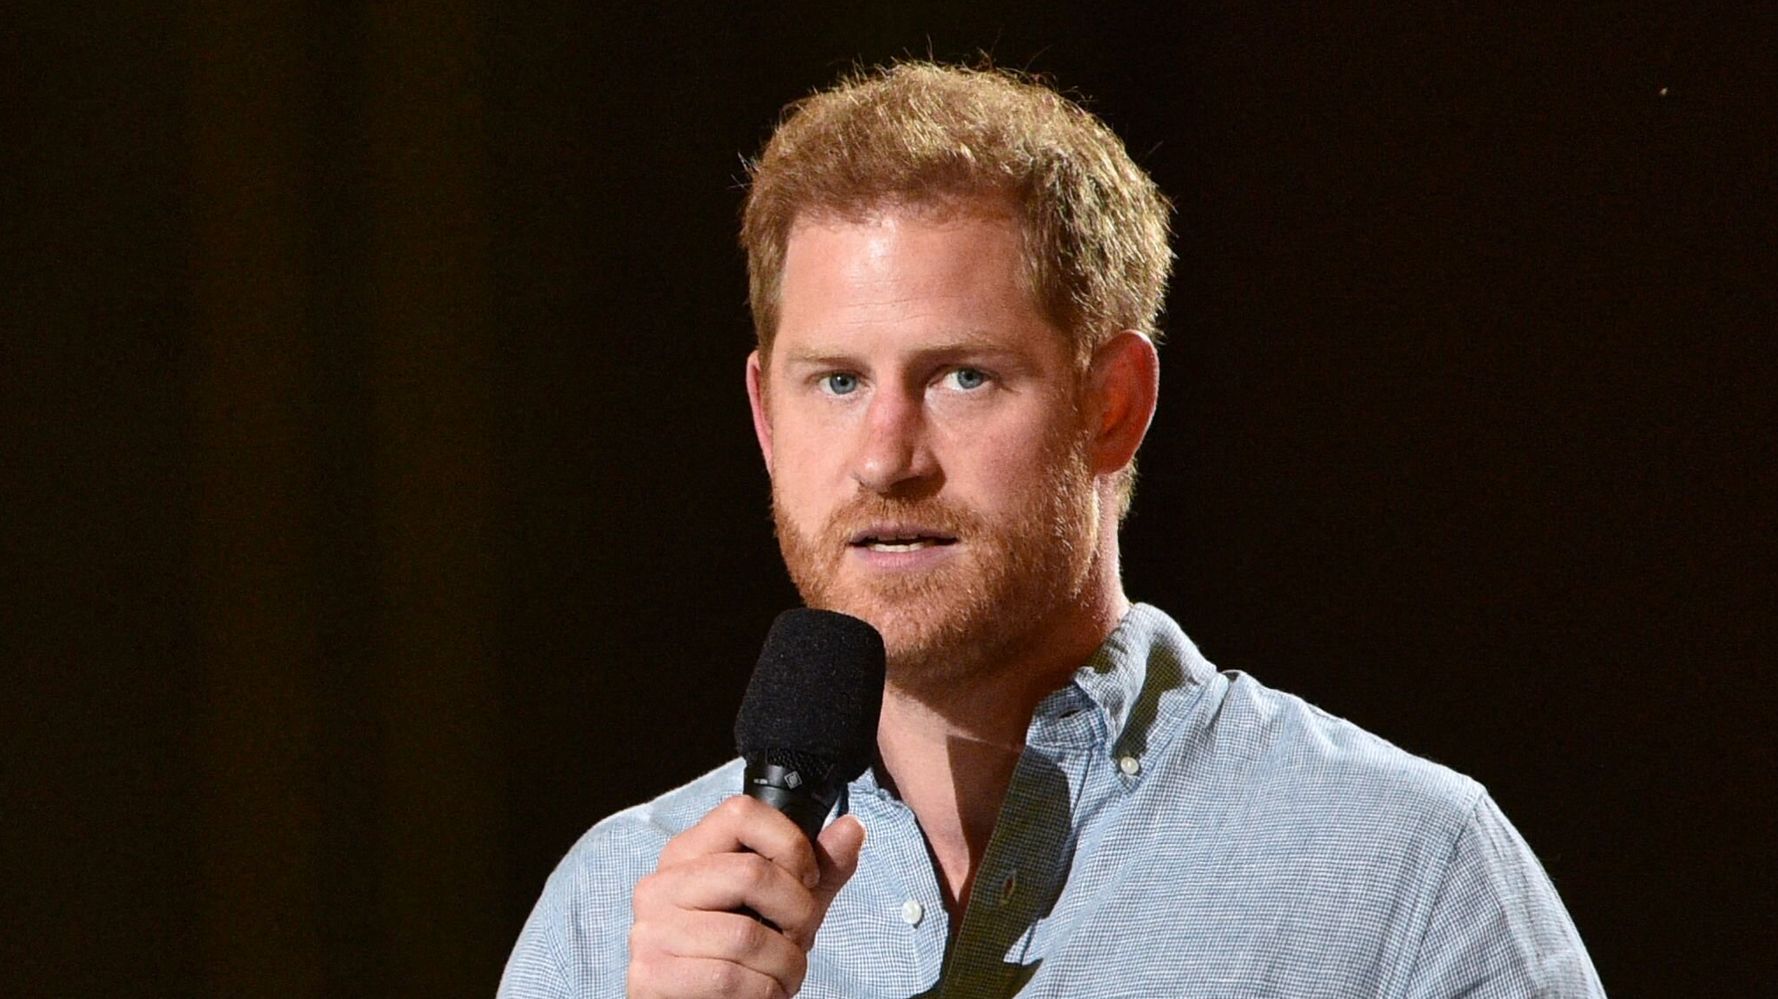 Prince Harry Says Access To COVID-19 Vaccine Should Be 'Basic Right'